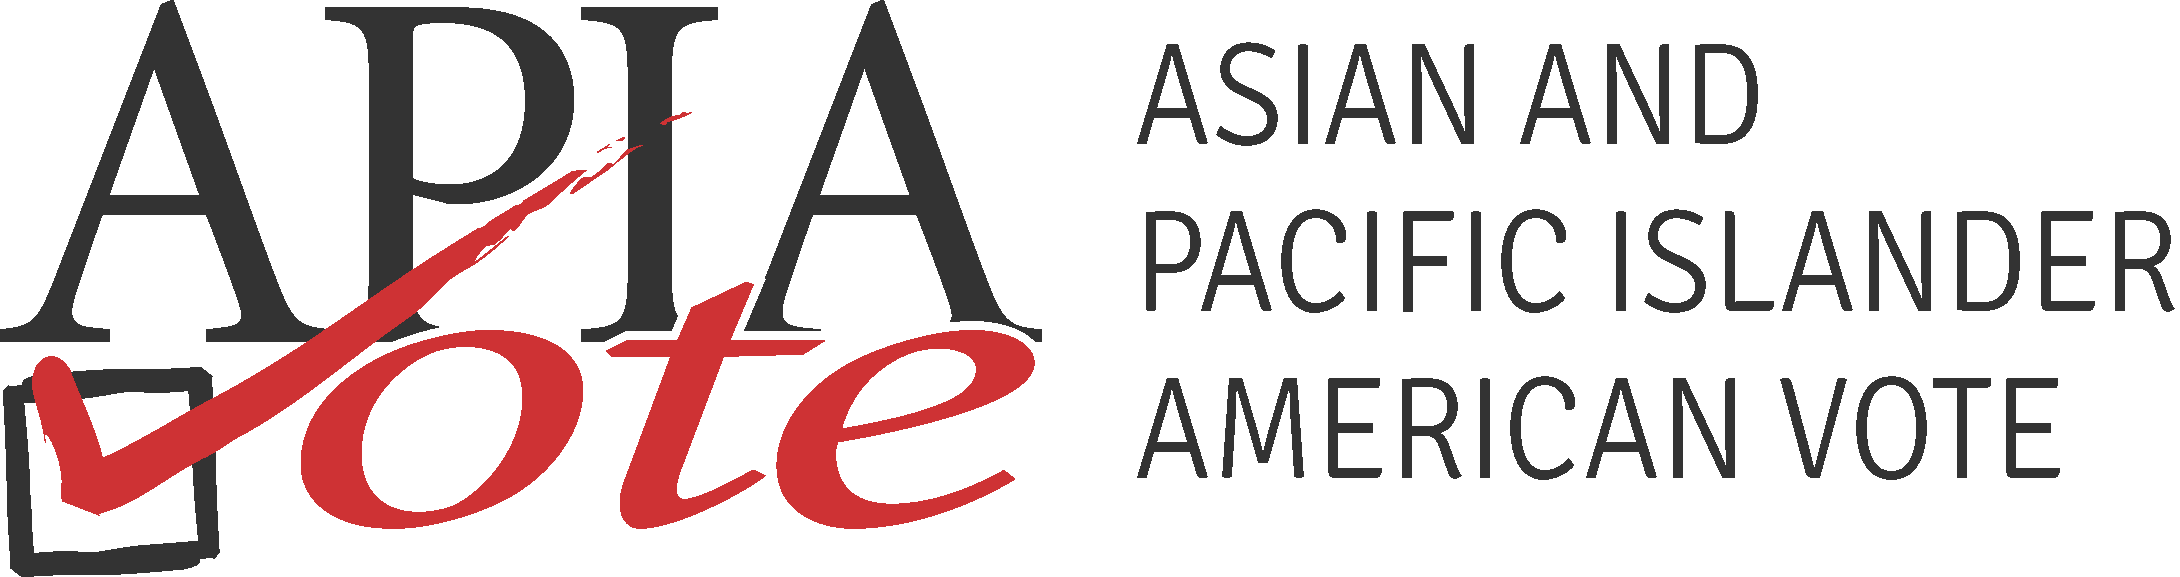 Logo for Asian and Pacific Islander American Vote